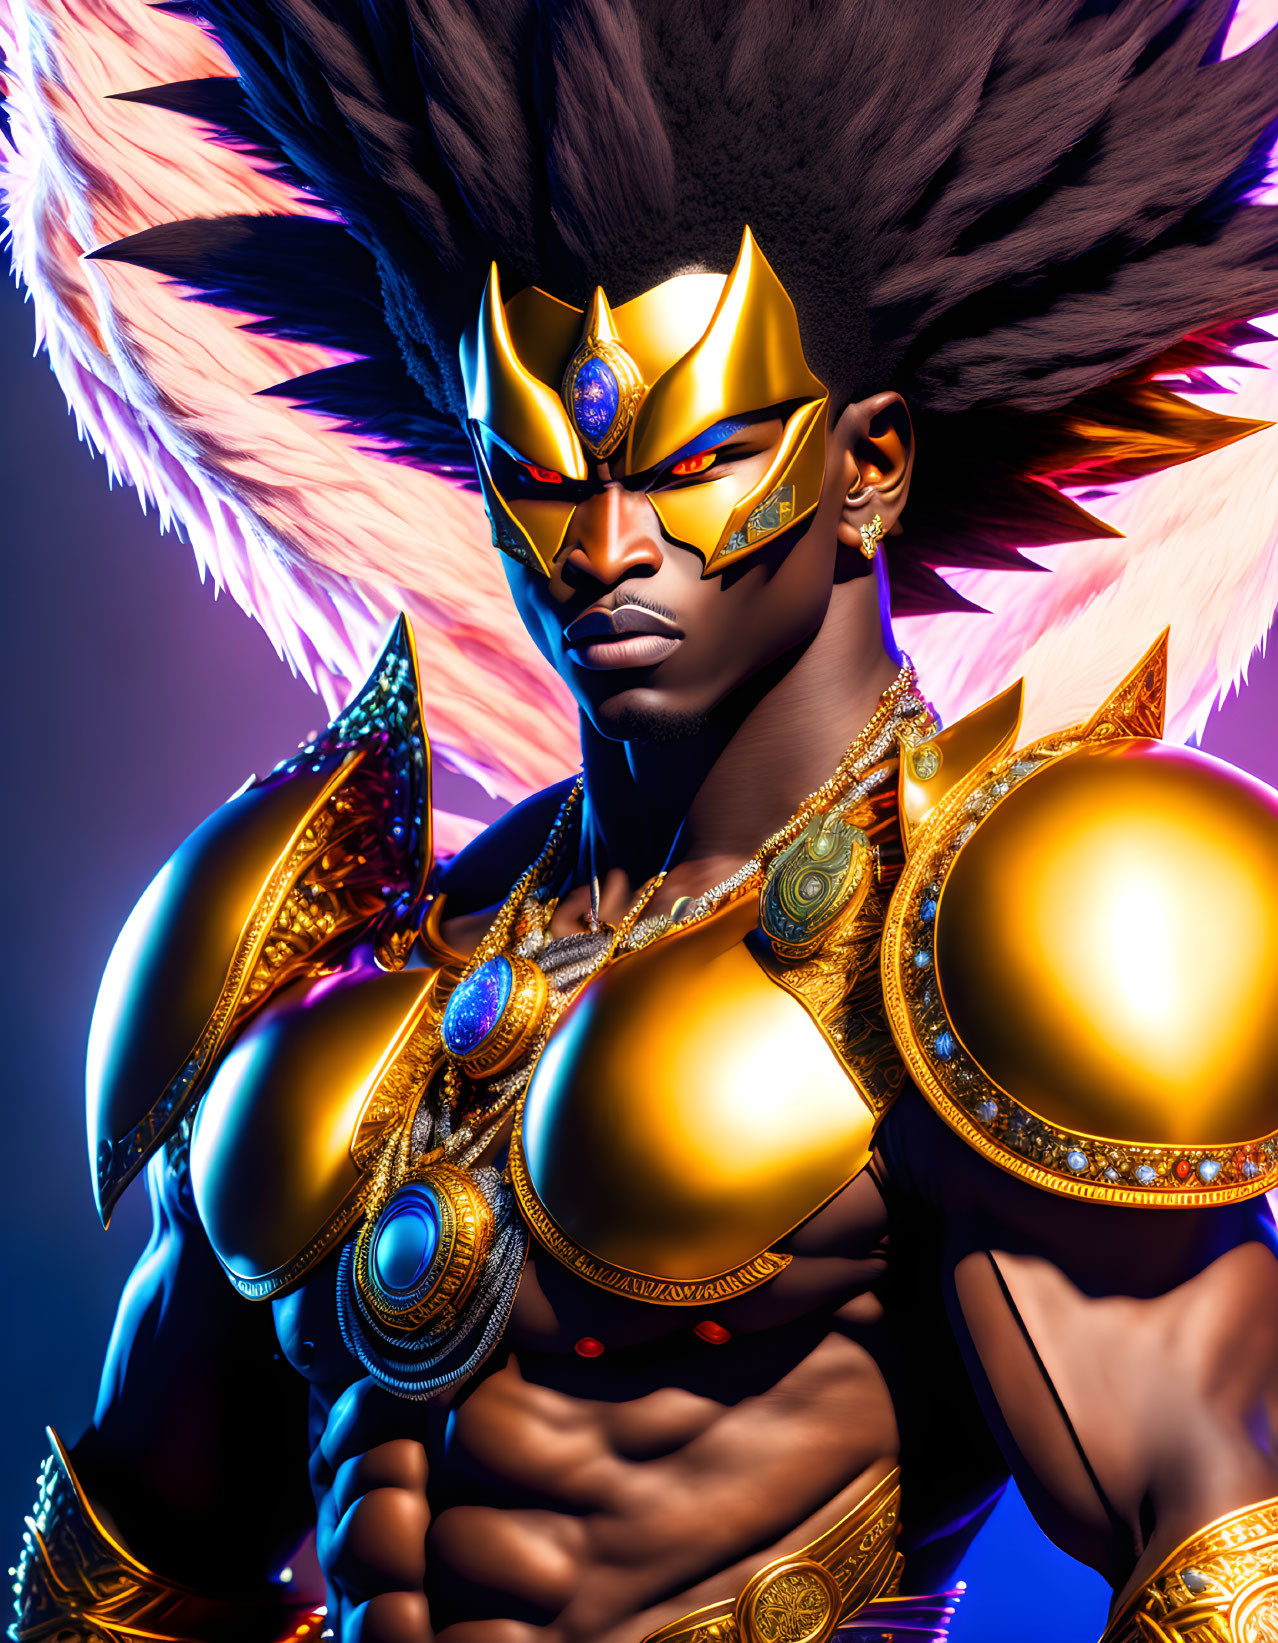 Person in Golden Crown and Blue Armor with Feathered Headdress in Dramatic Pose